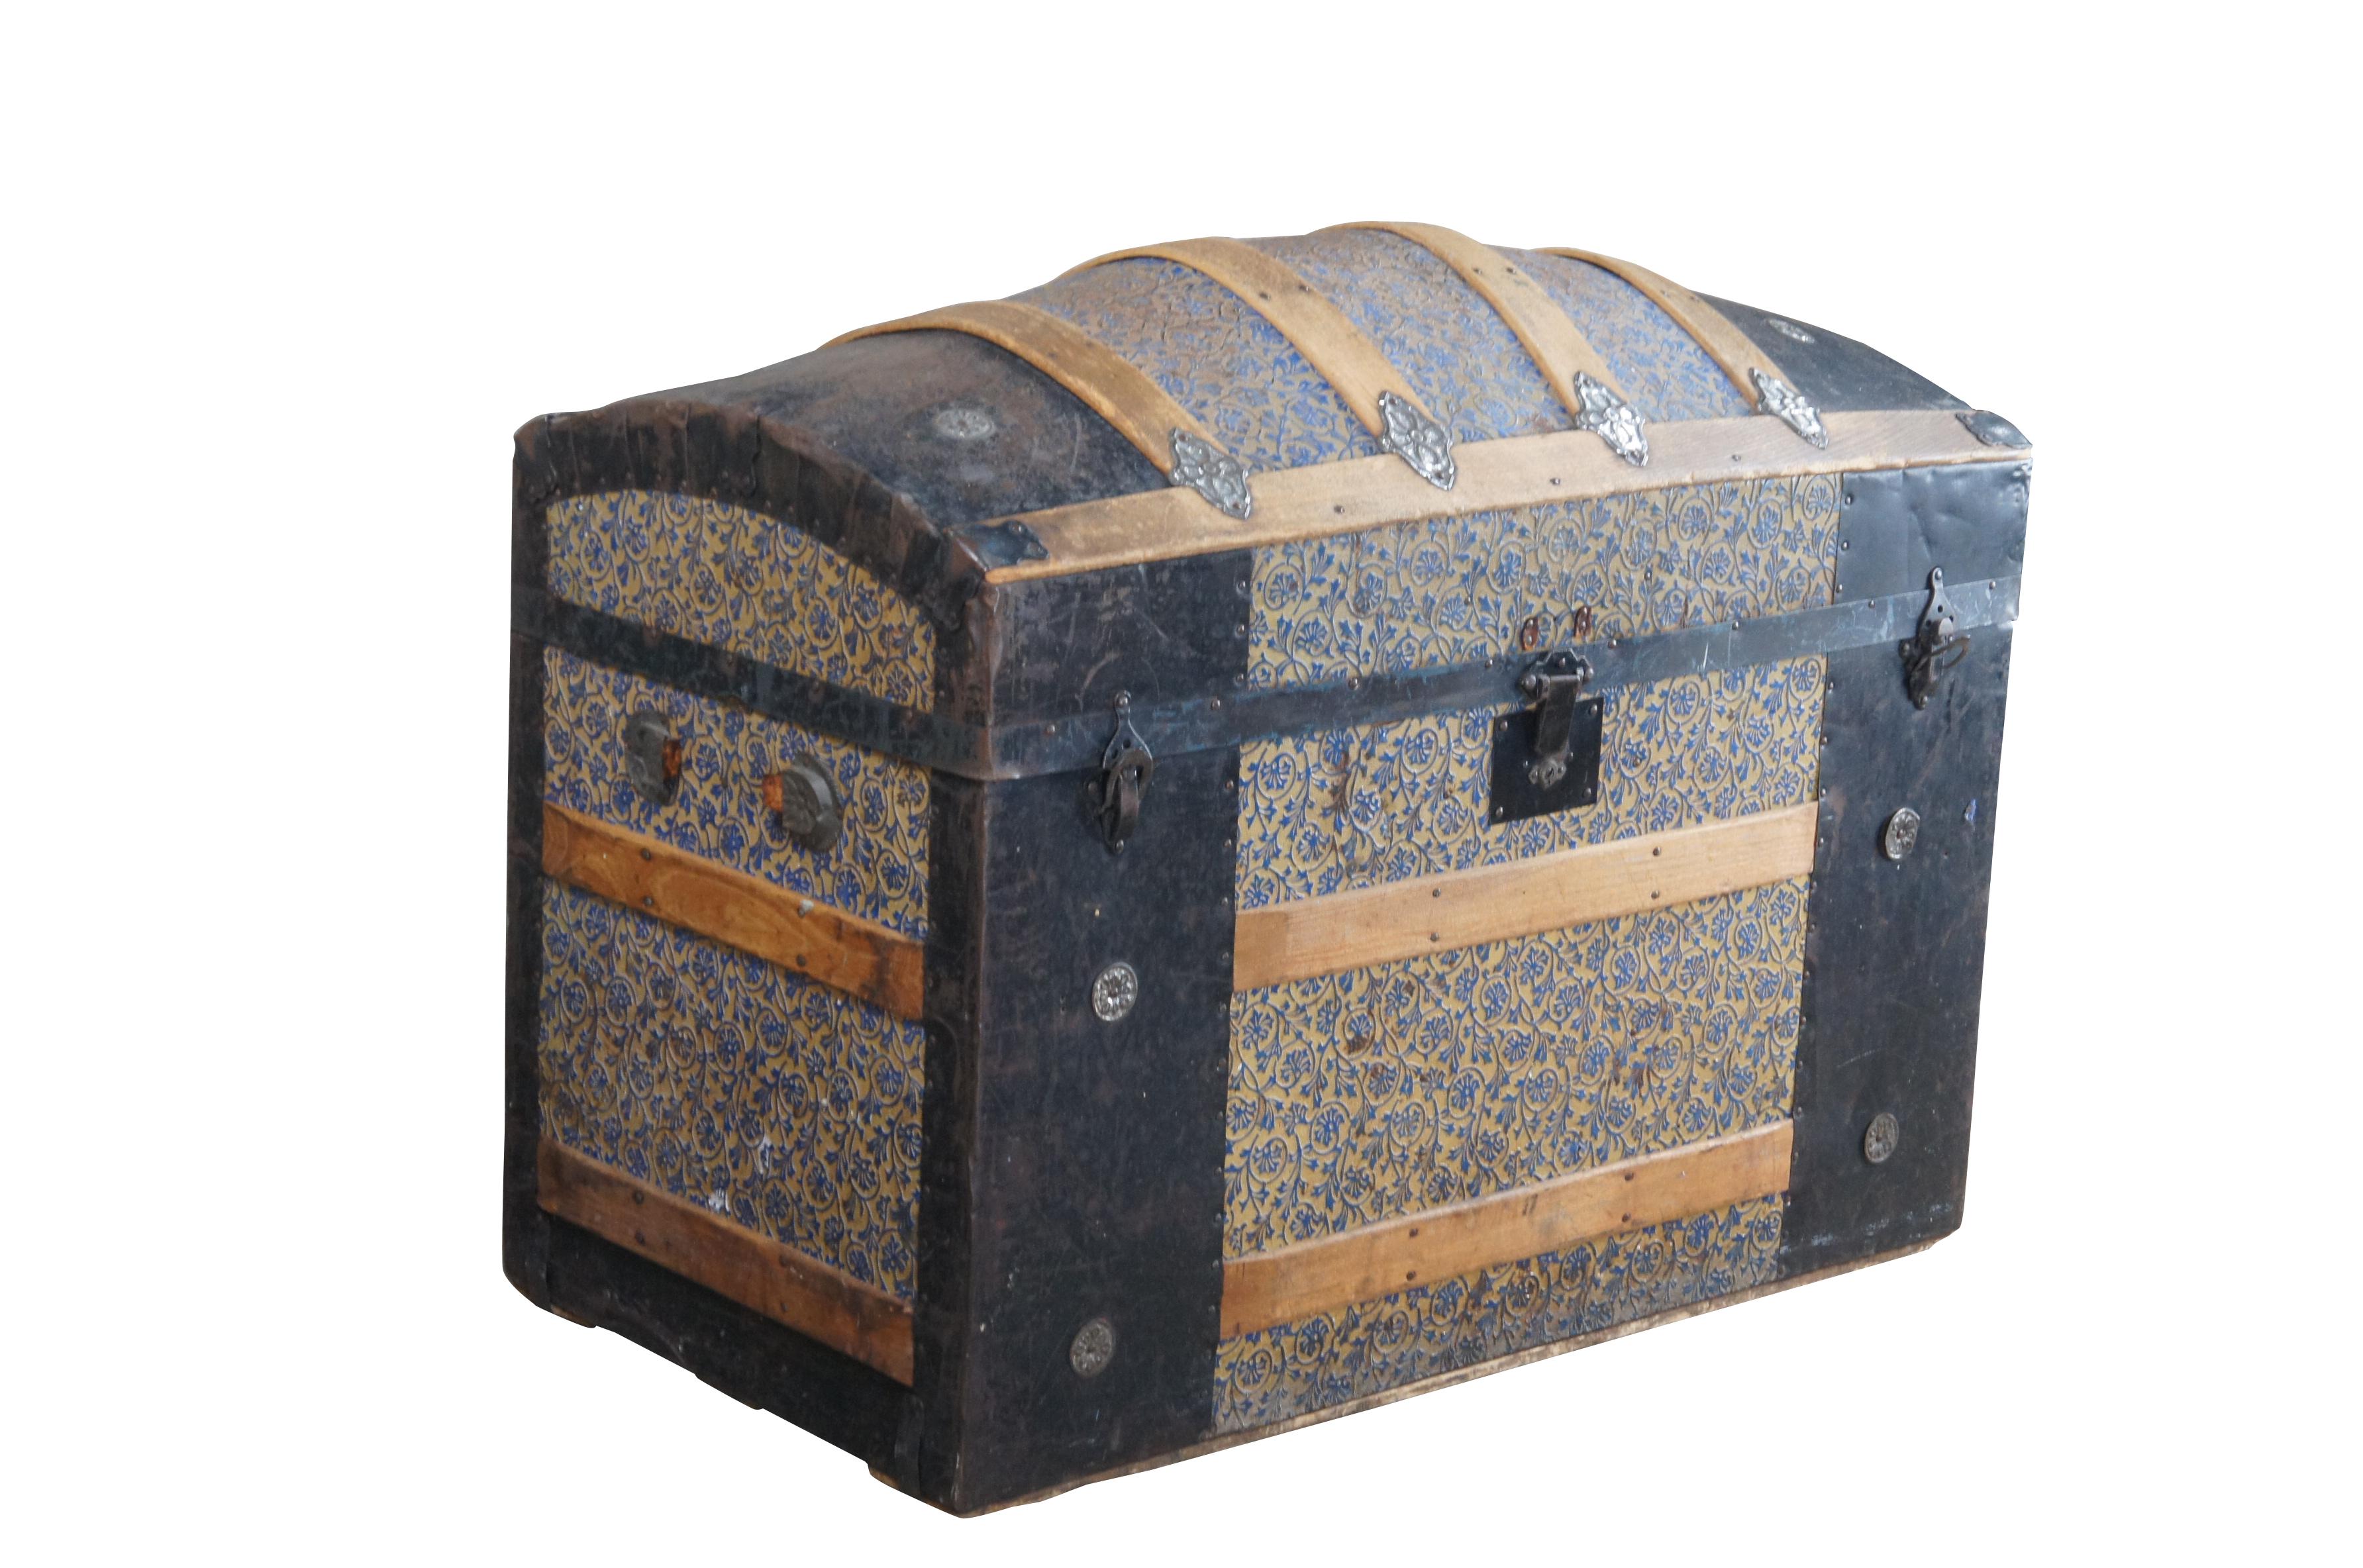 A large and impressive Victorian era dome top steamer trunk, circa 1870s. Features a tooled leather frame wrapped in black metal with oak banding and gold medallions.   Opens to two litho portraits on the lid and a compartment for additional